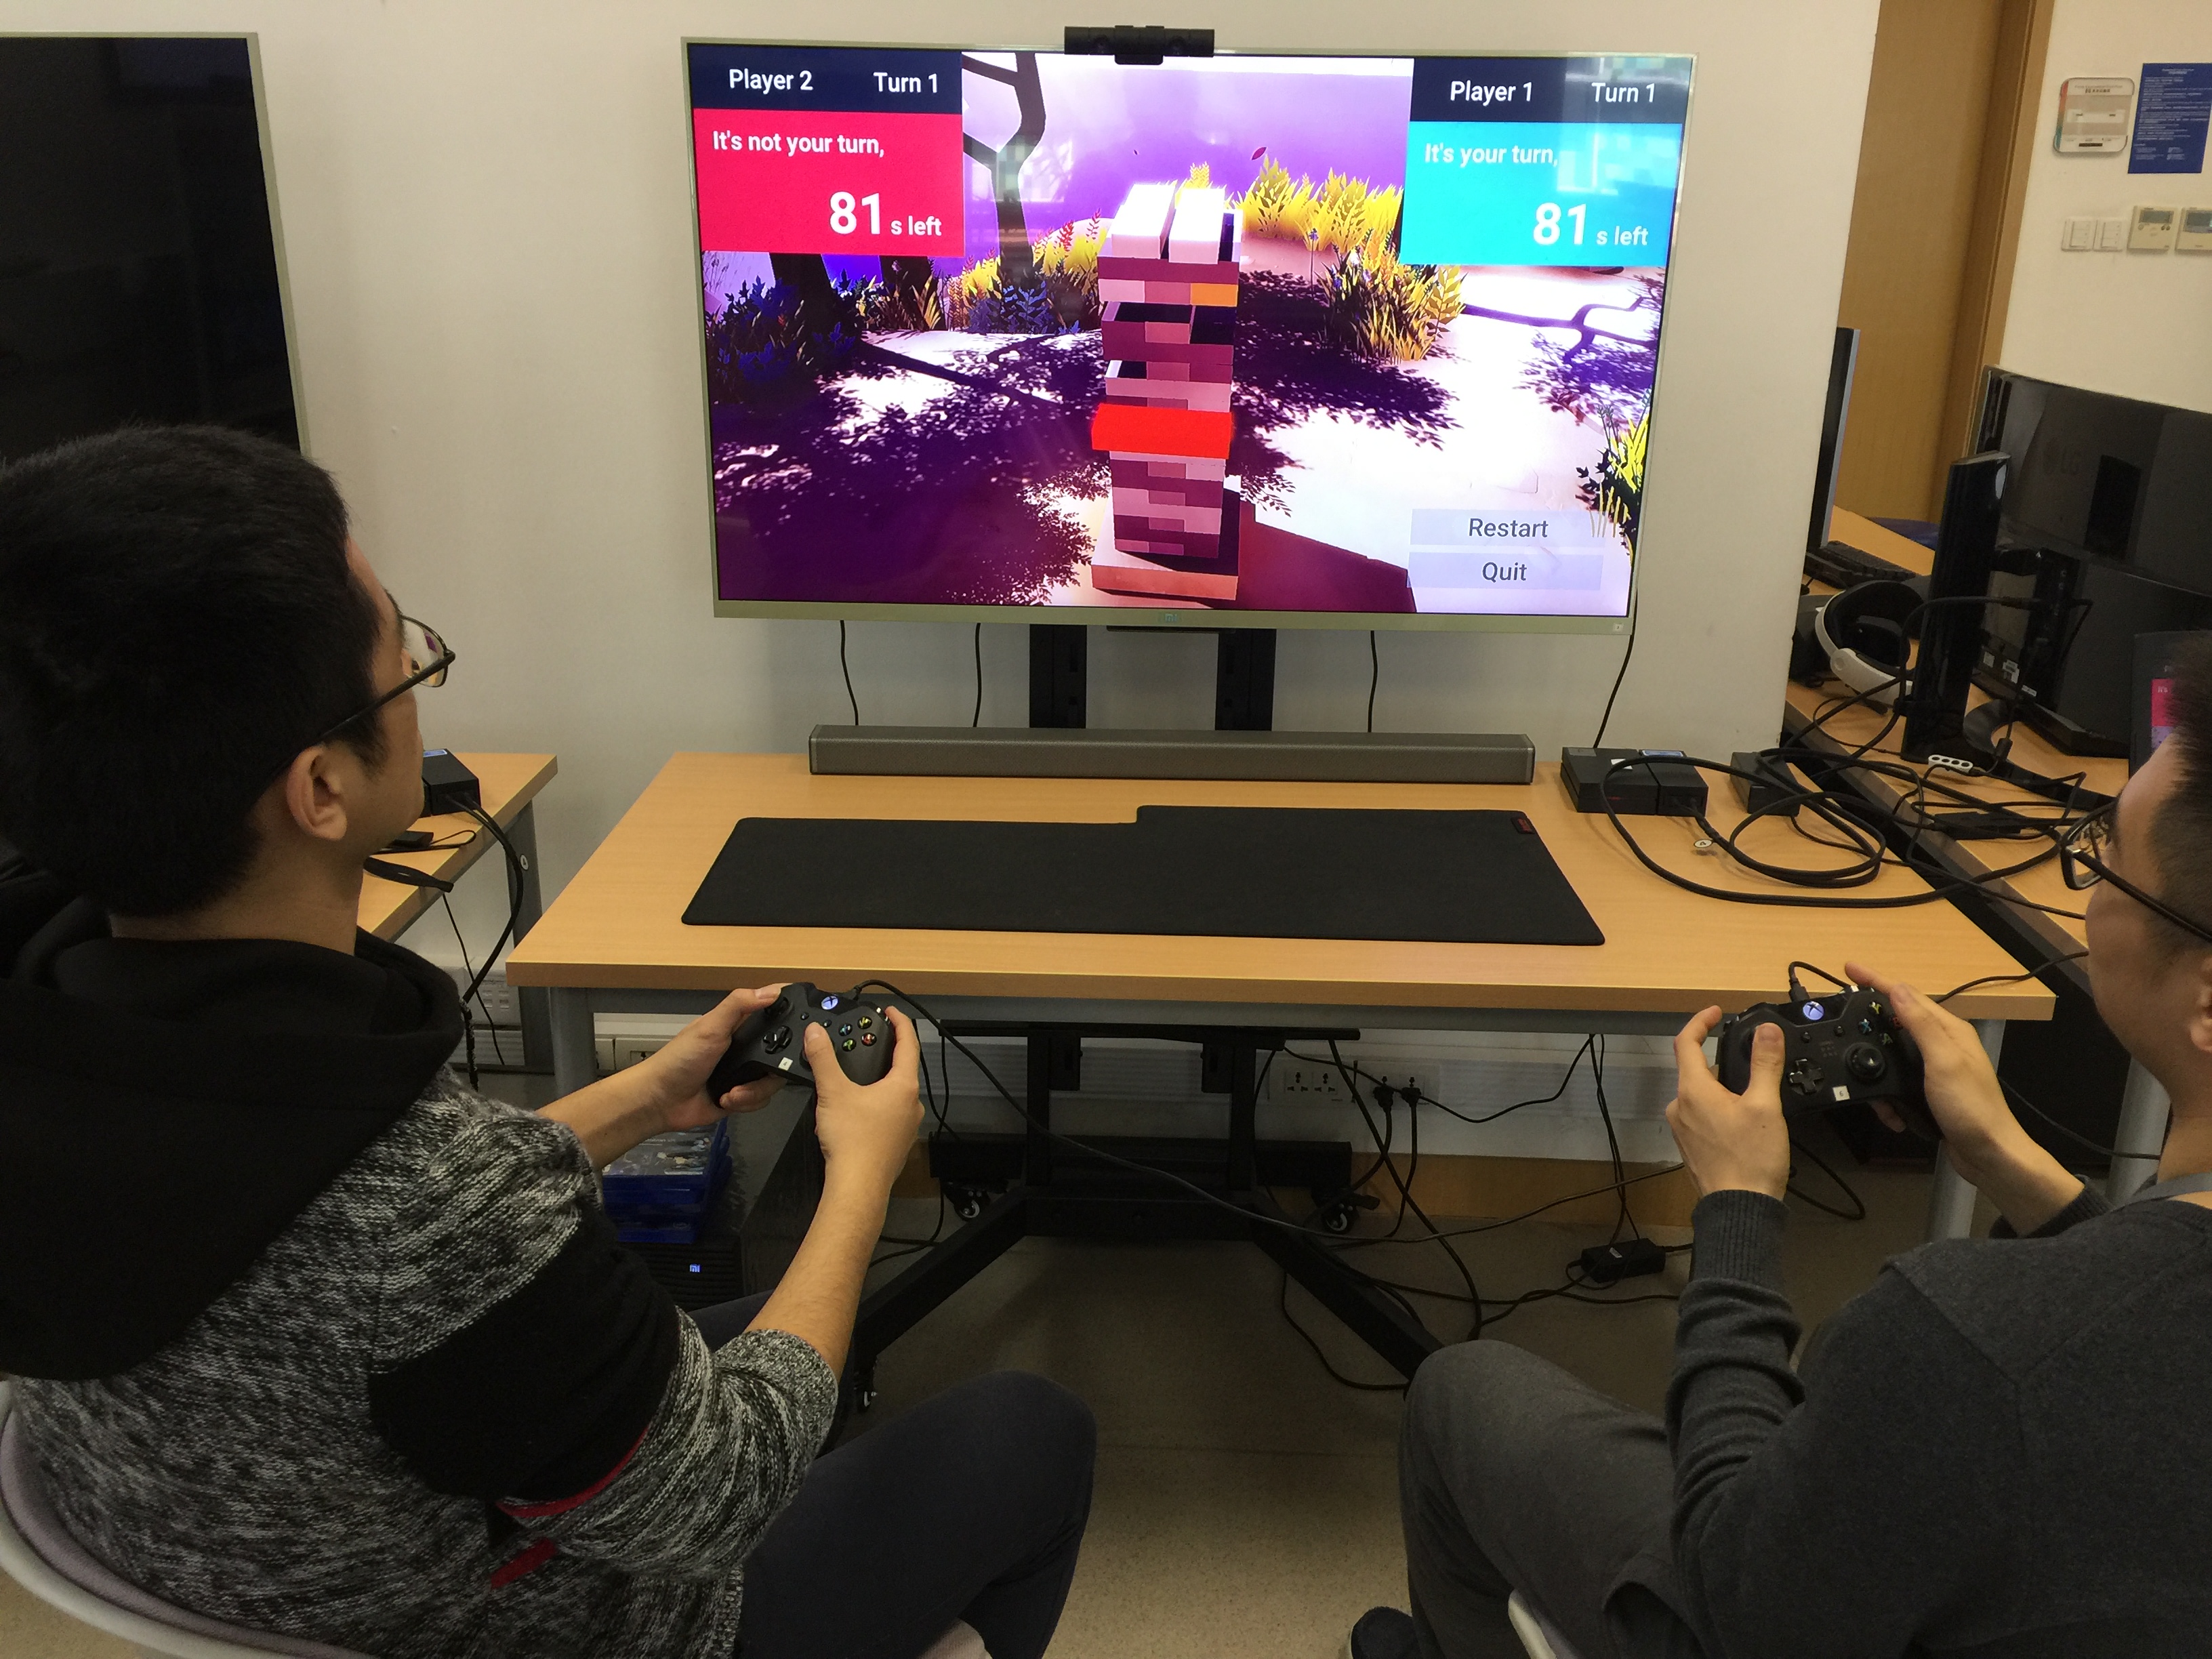 Image of 2 co-located players playing blocktower on a shared large tv display.